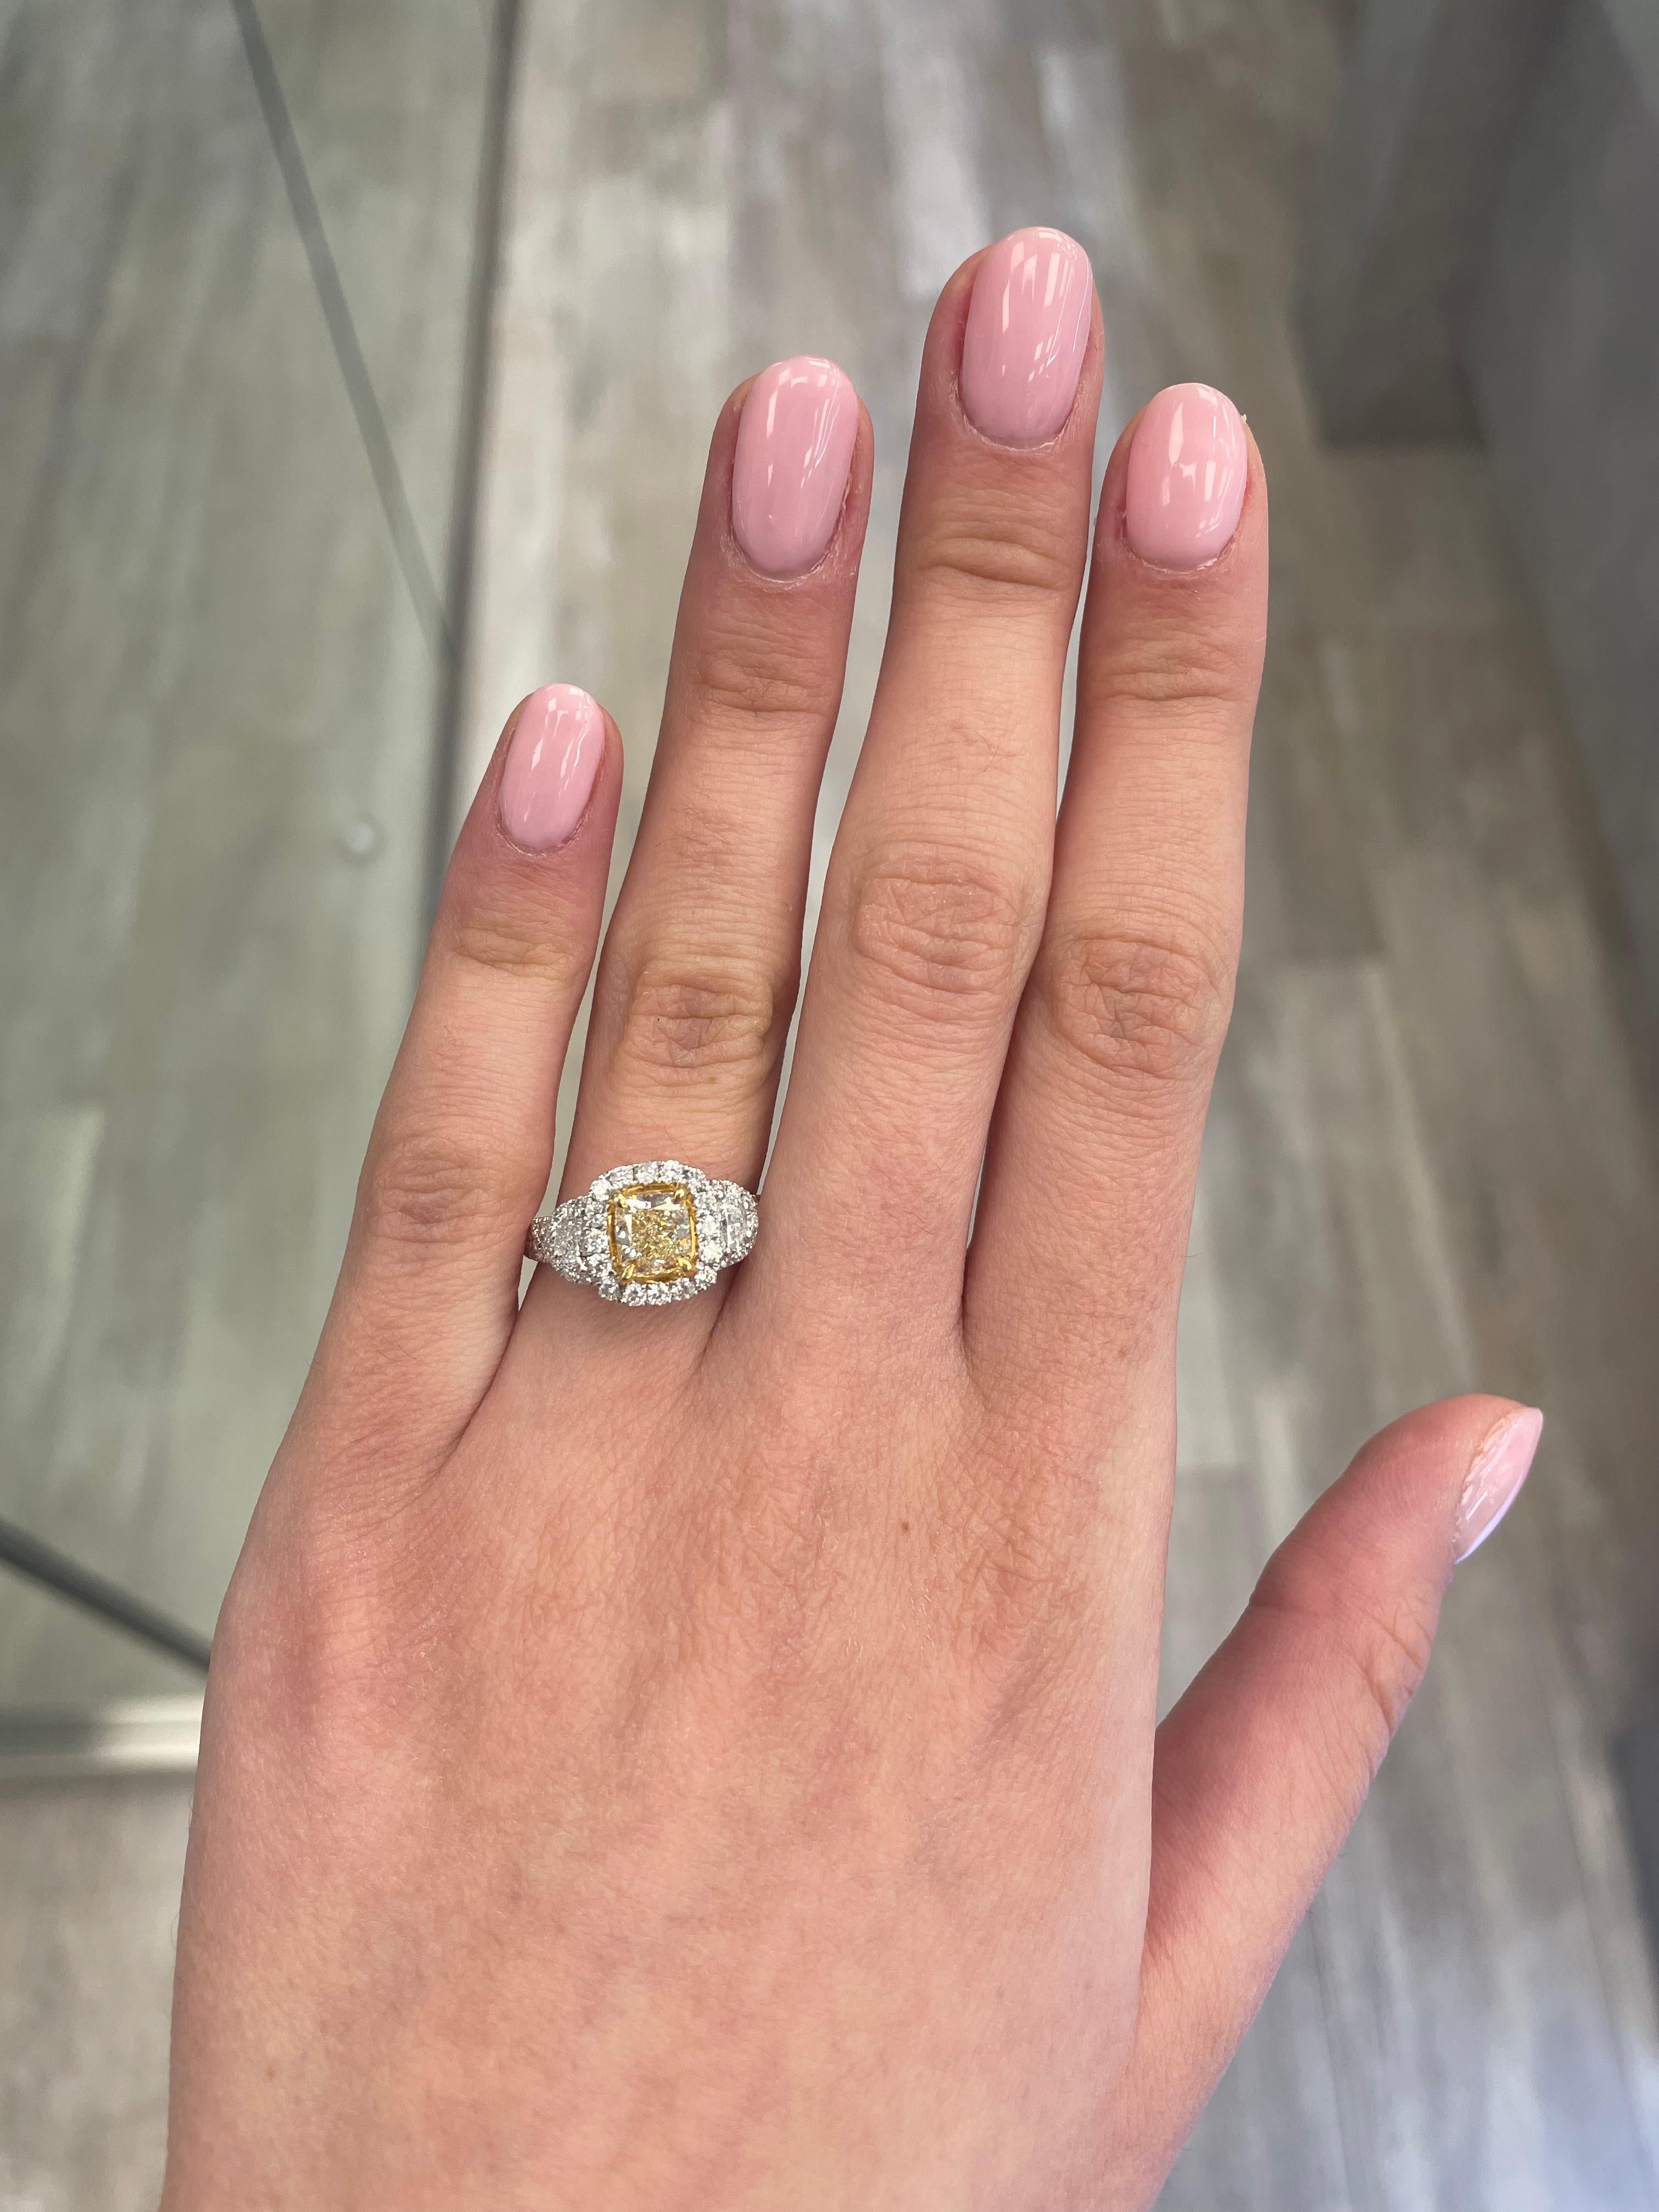 Stunning modern EGL certified fancy yellow diamond three stone halo ring, two-tone 18k yellow and white gold, split shank. By Alexander Beverly Hills
2.27 carats total diamond weight.
1.51 carat cushion Fancy Yellow color and VS1 clarity diamond,